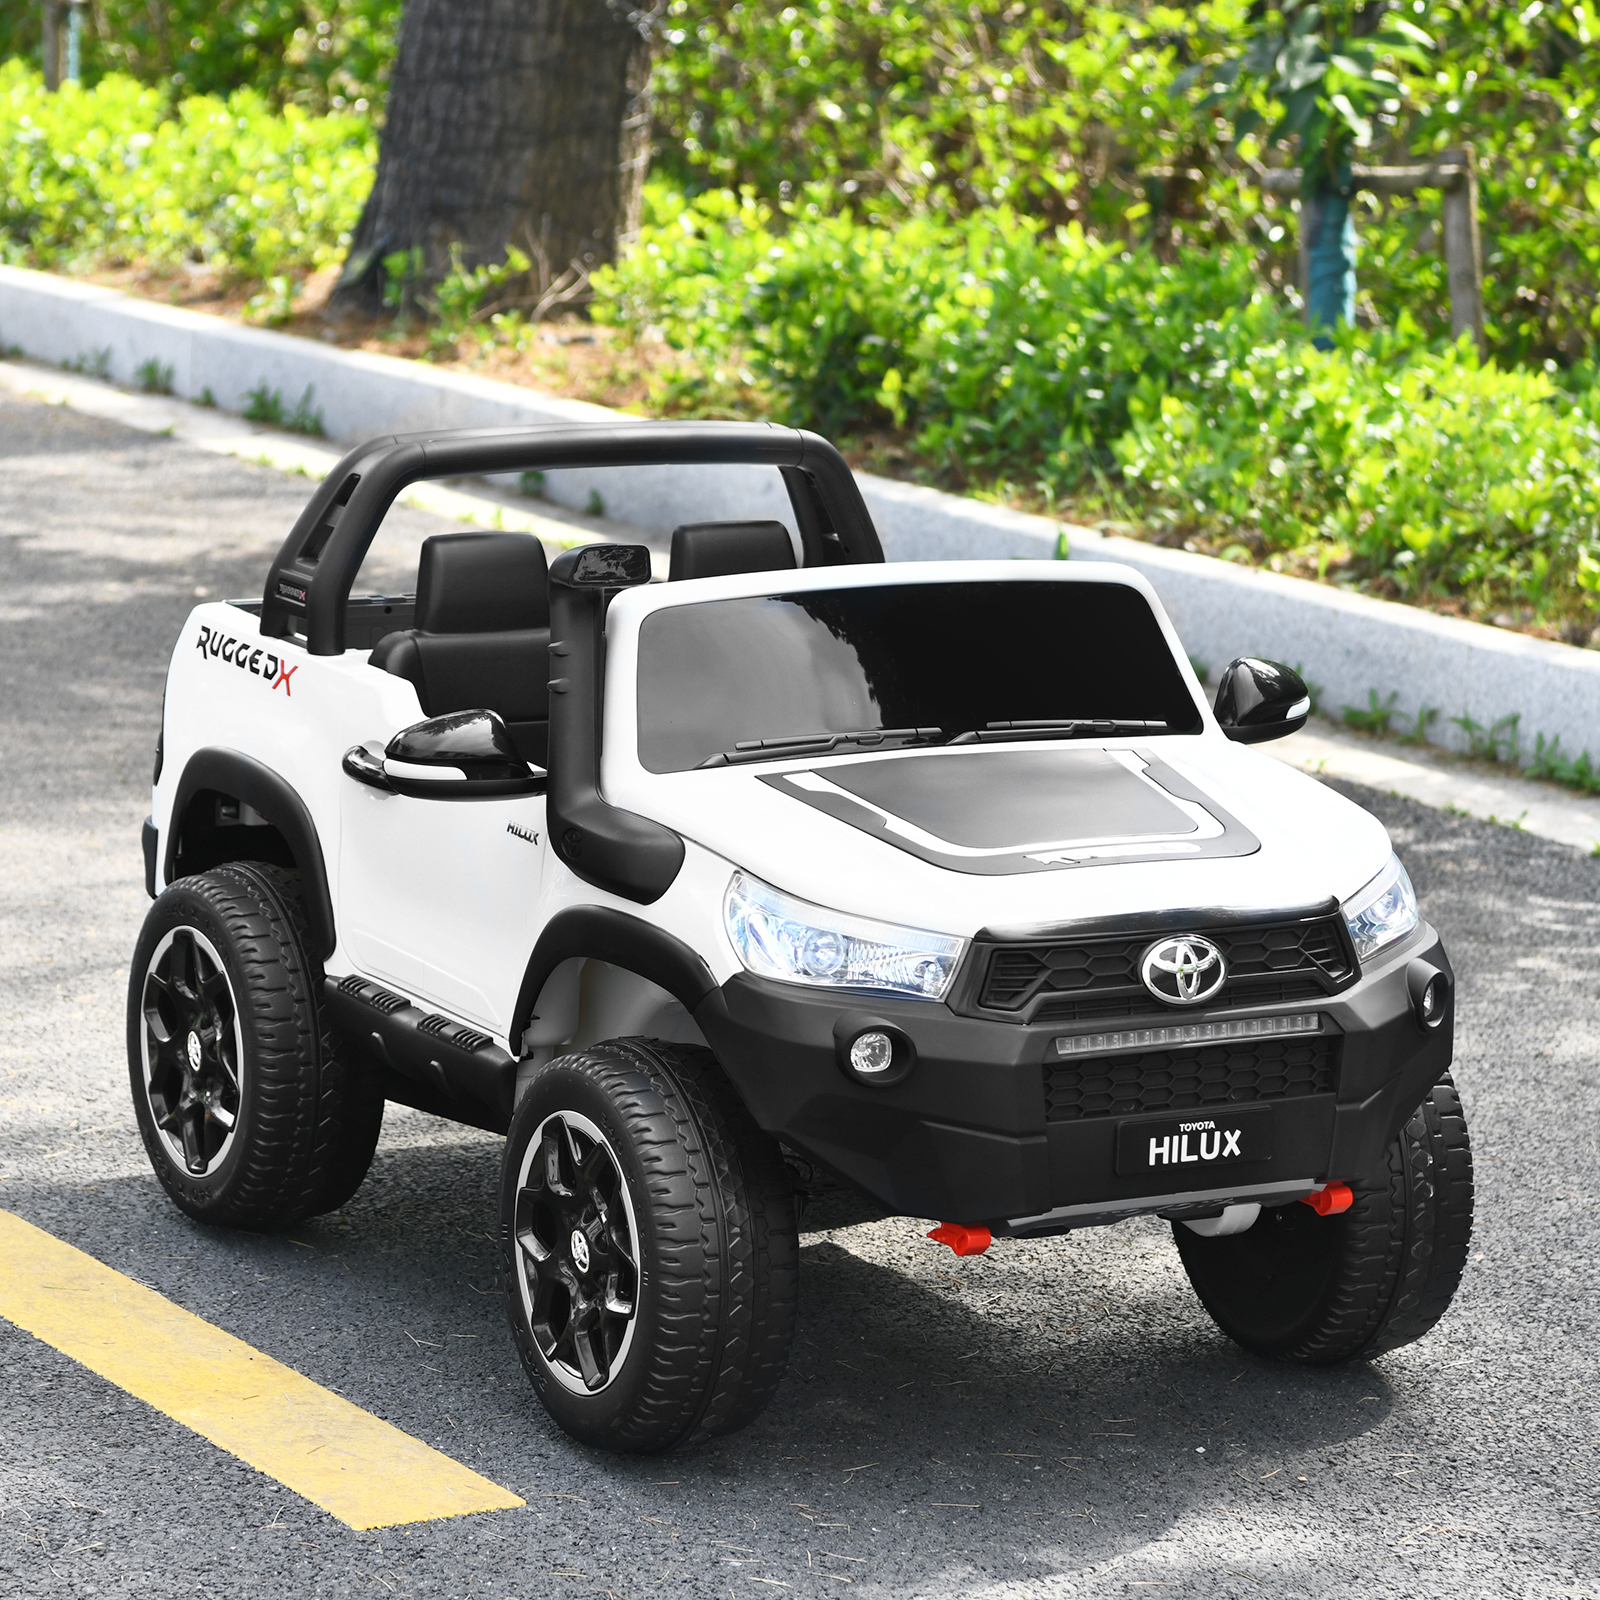 Infans 2*12V Licensed Toyota Hilux Ride On Truck Car 2-Seater 4WD Remote Control White - image 2 of 7